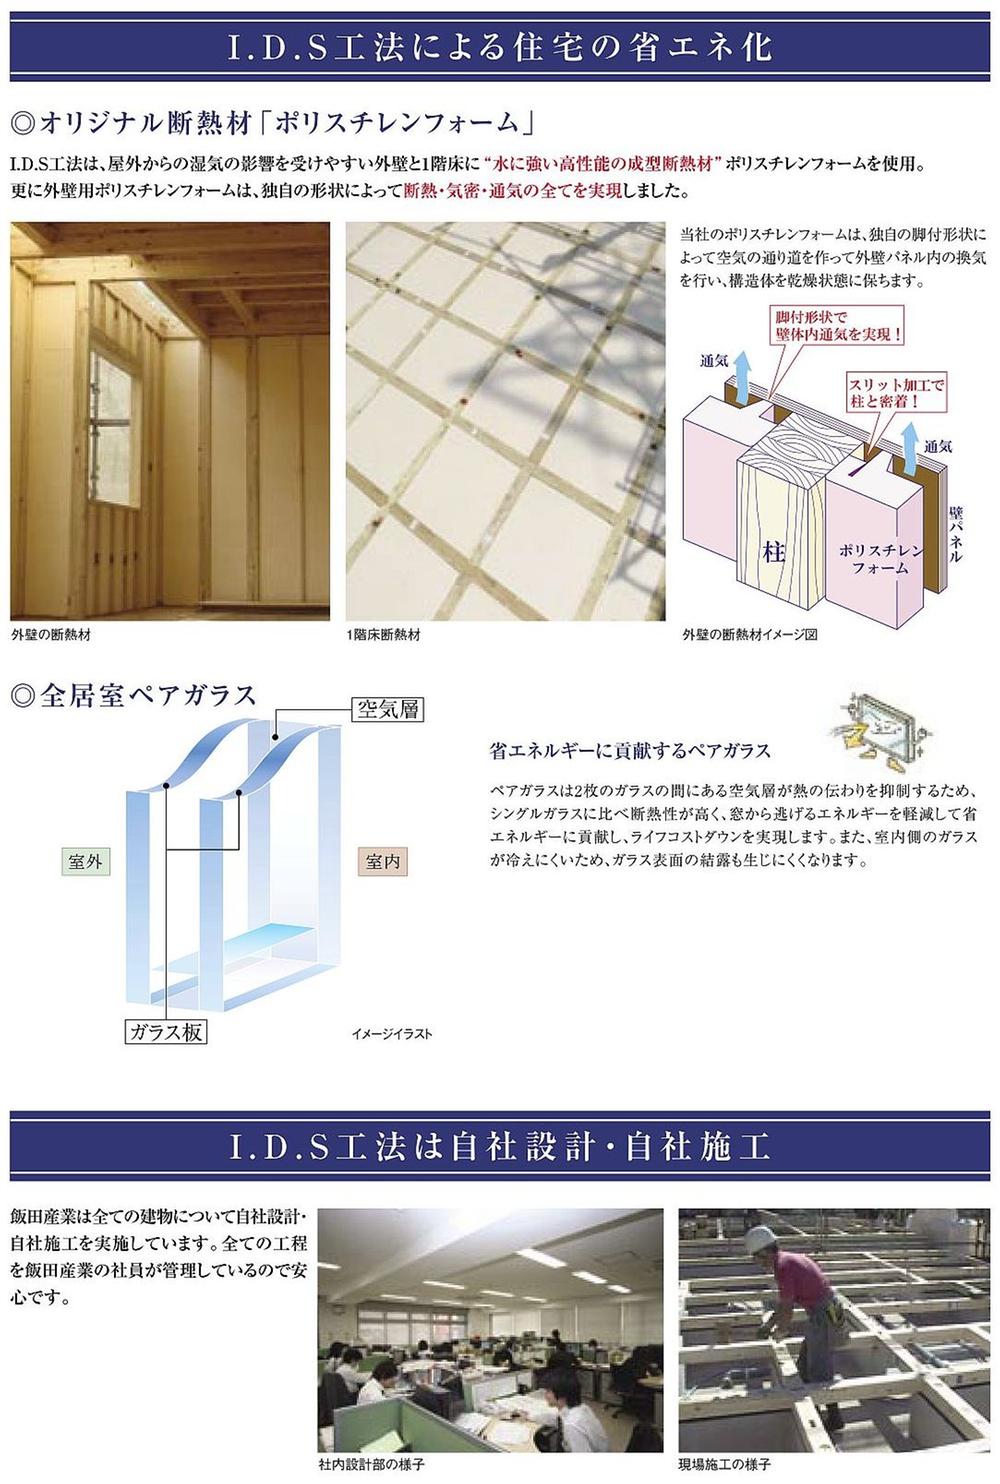 Construction ・ Construction method ・ specification. Molding insulation material by "polystyrene foam", High thermal insulation effect ・ At the same time breathability and air-tightness also improved, Keep the dry state of the internal wall! 